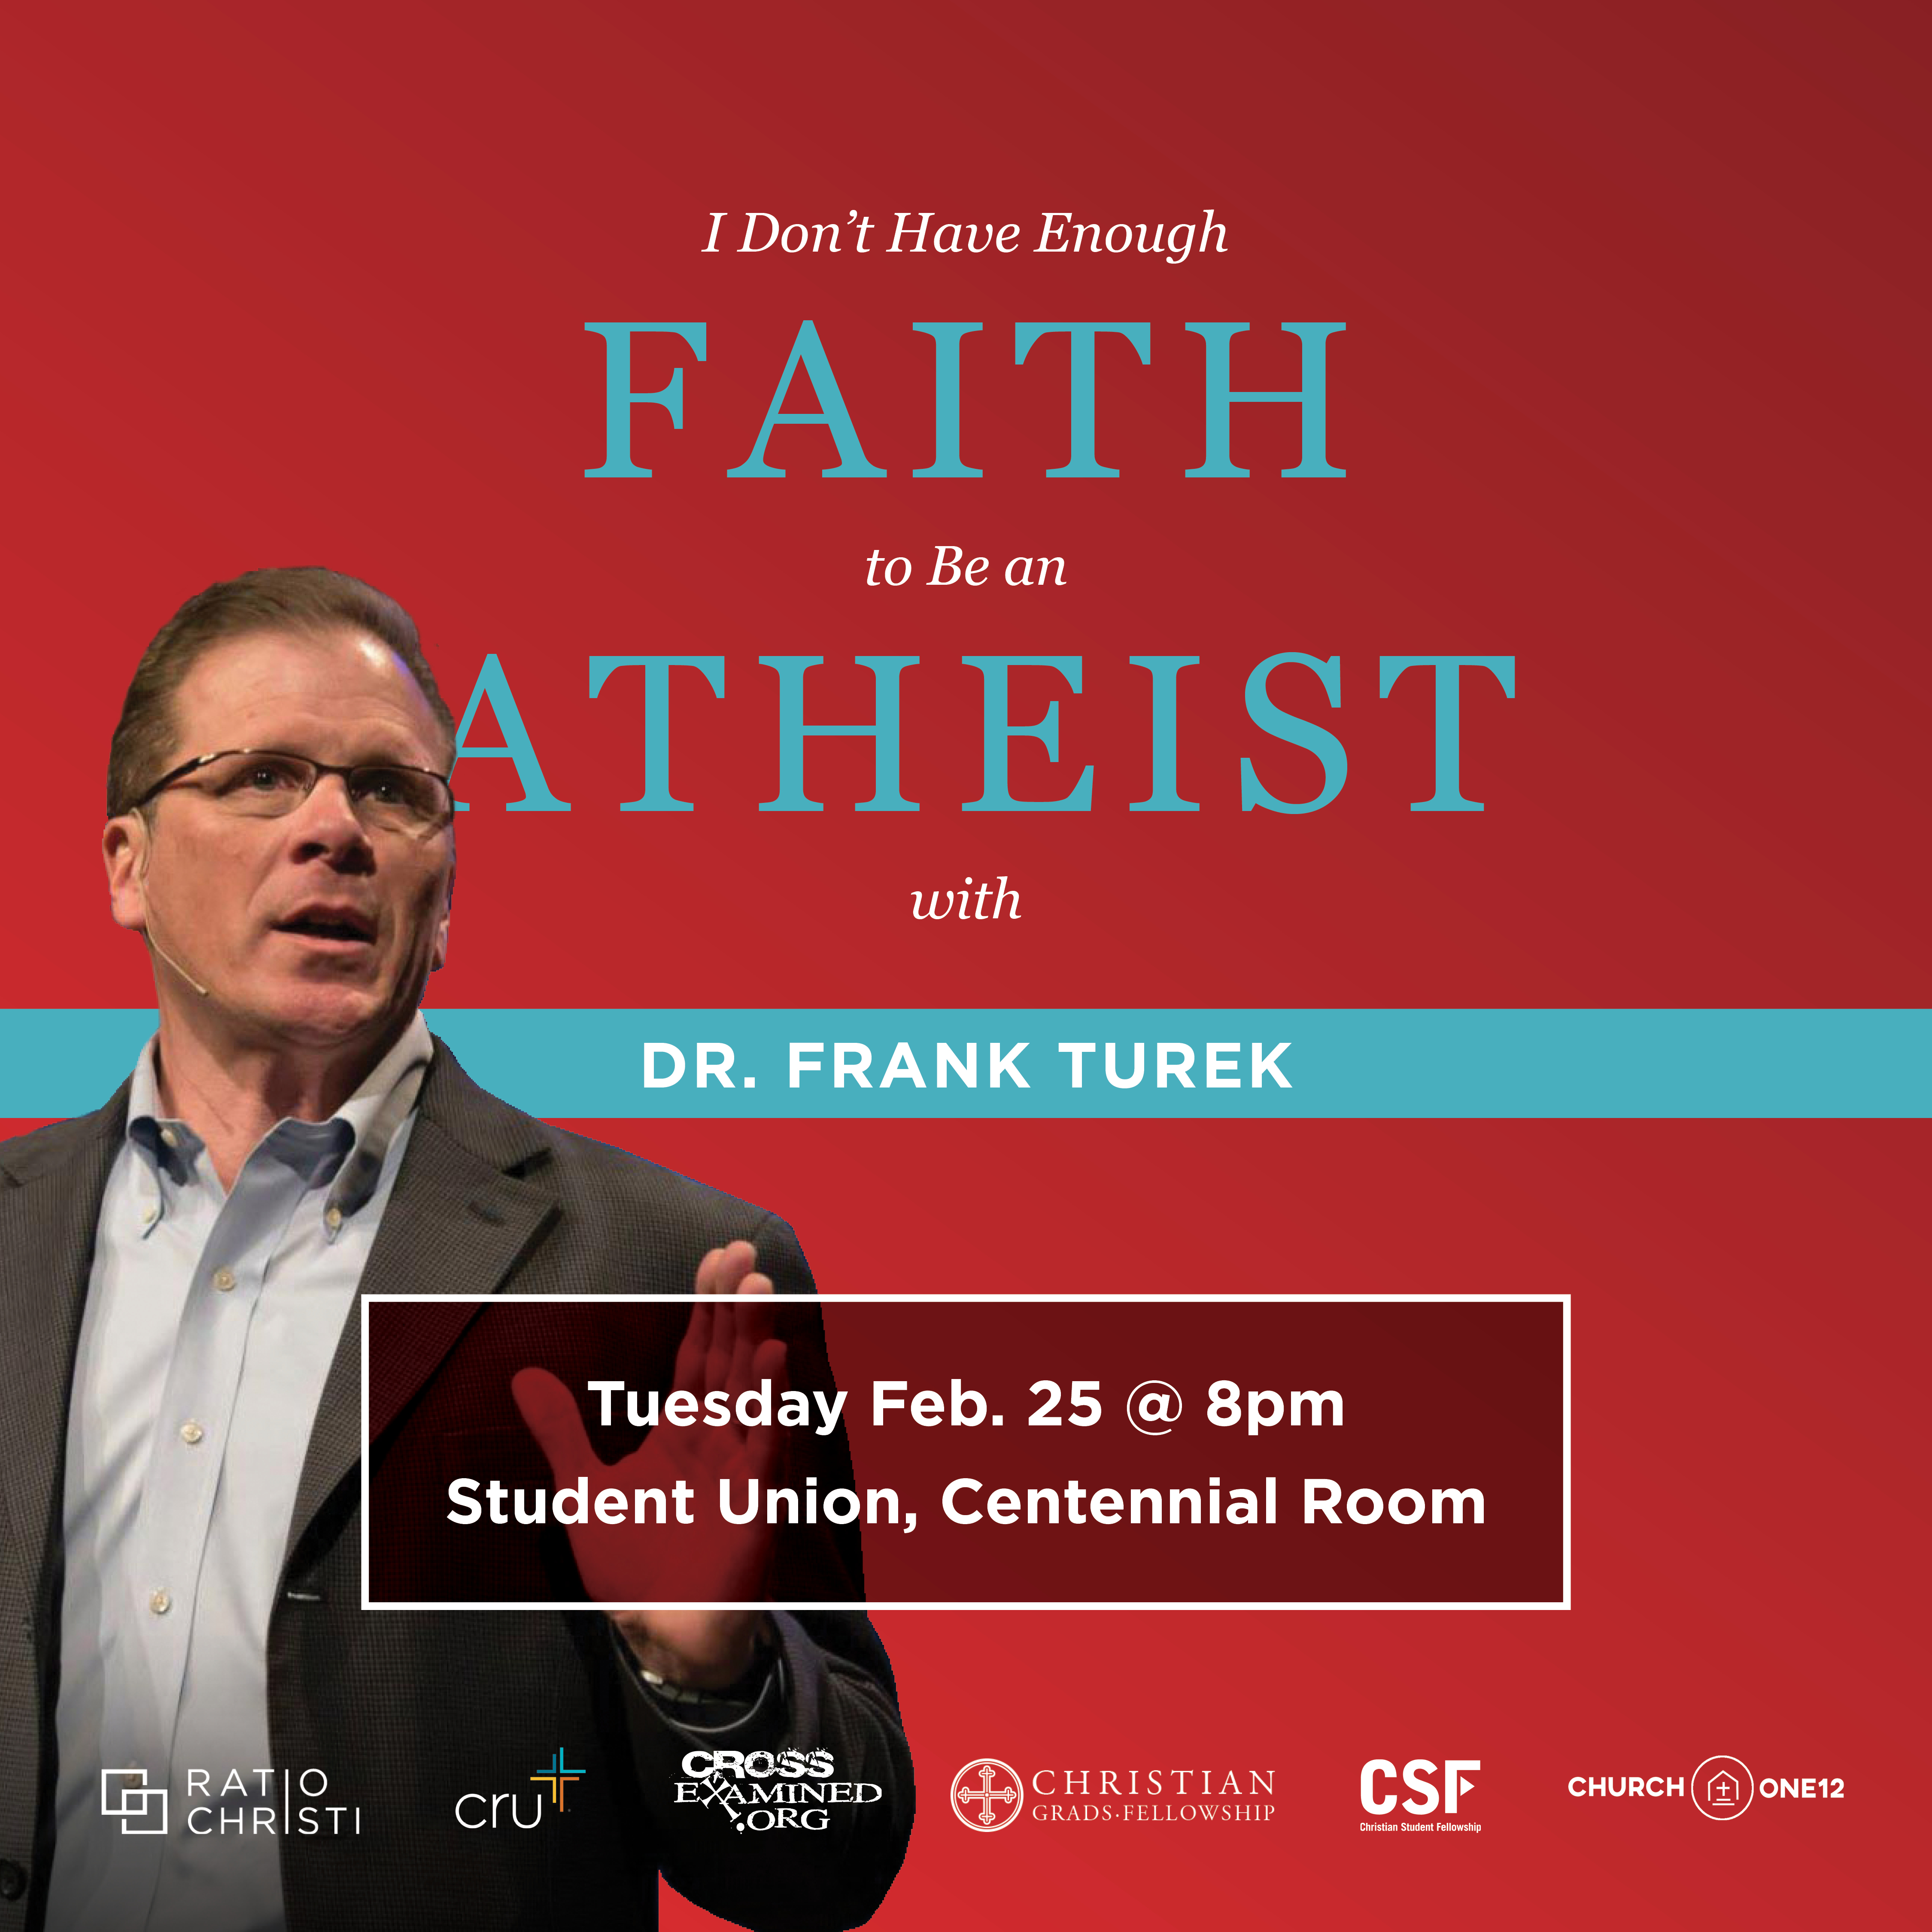 I Don't Have Enough Faith to Be an Atheist with Dr. Frank Turek